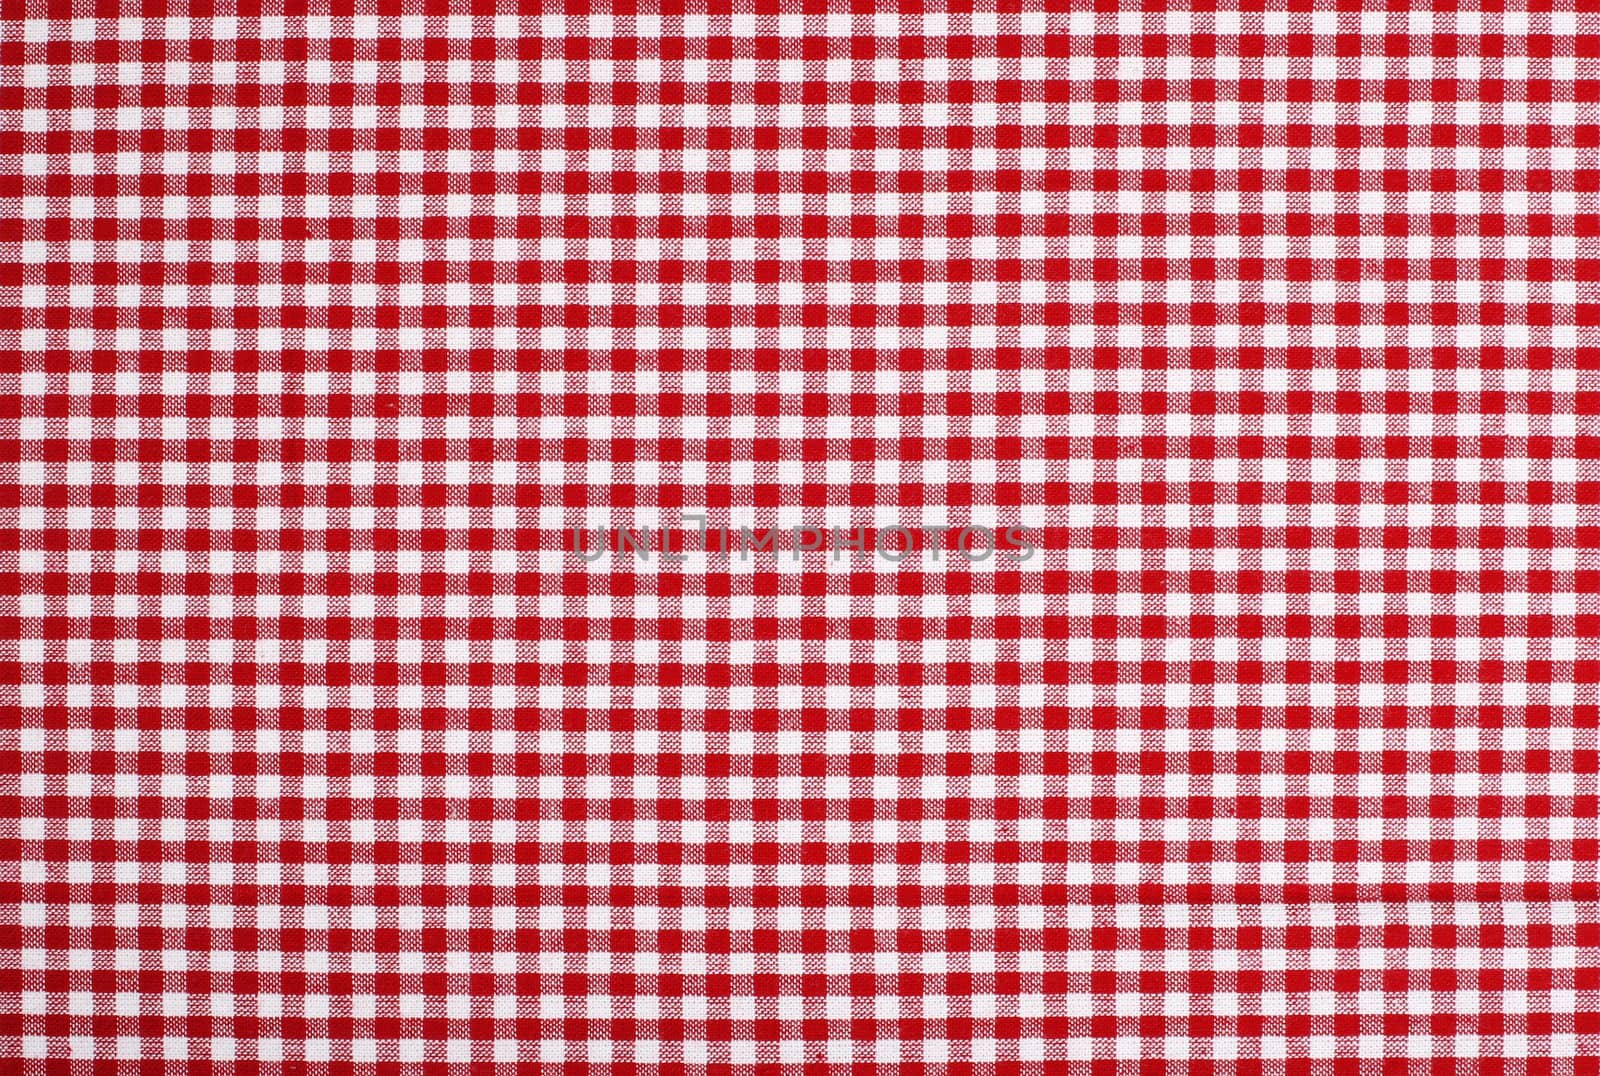 Detailed red picnic cloth - The tablecloth is new, clean and flat without creases